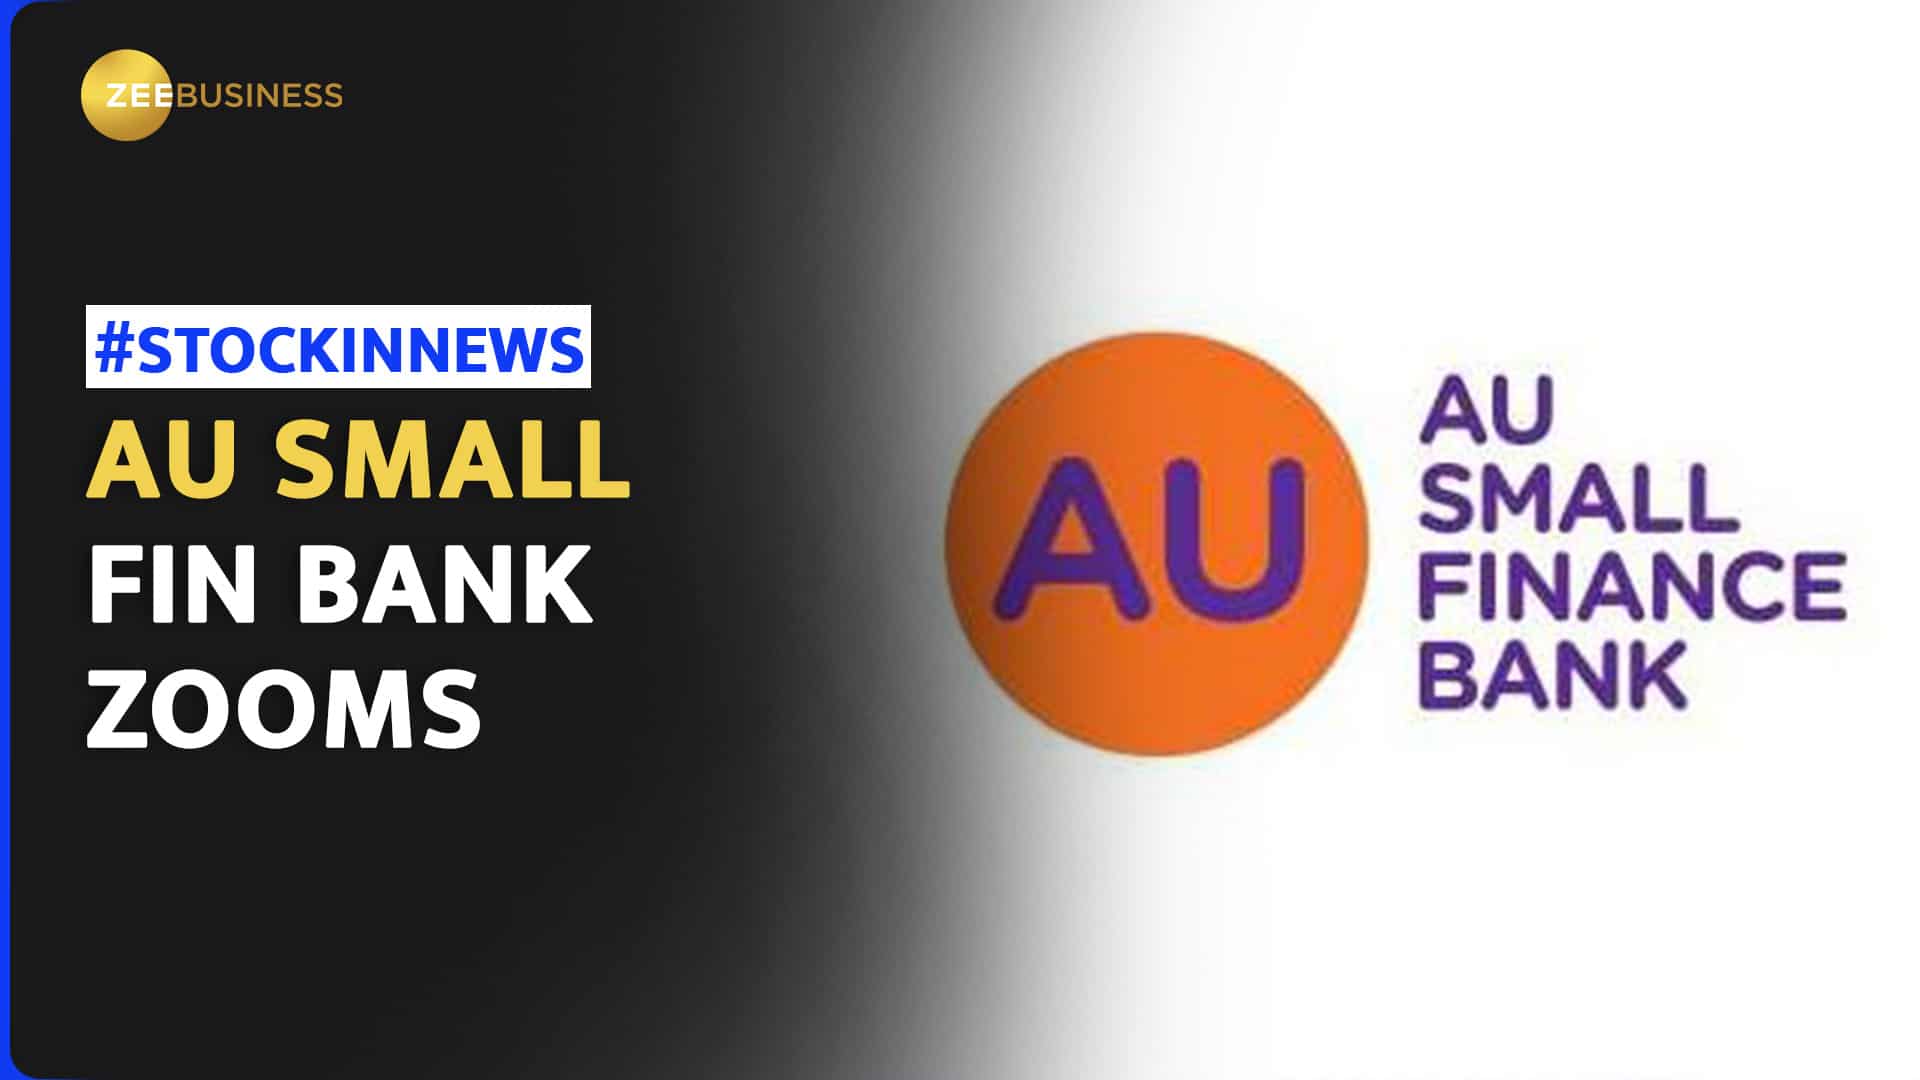 AU SMALL FINANCE BANK LTD Apps on the App Store